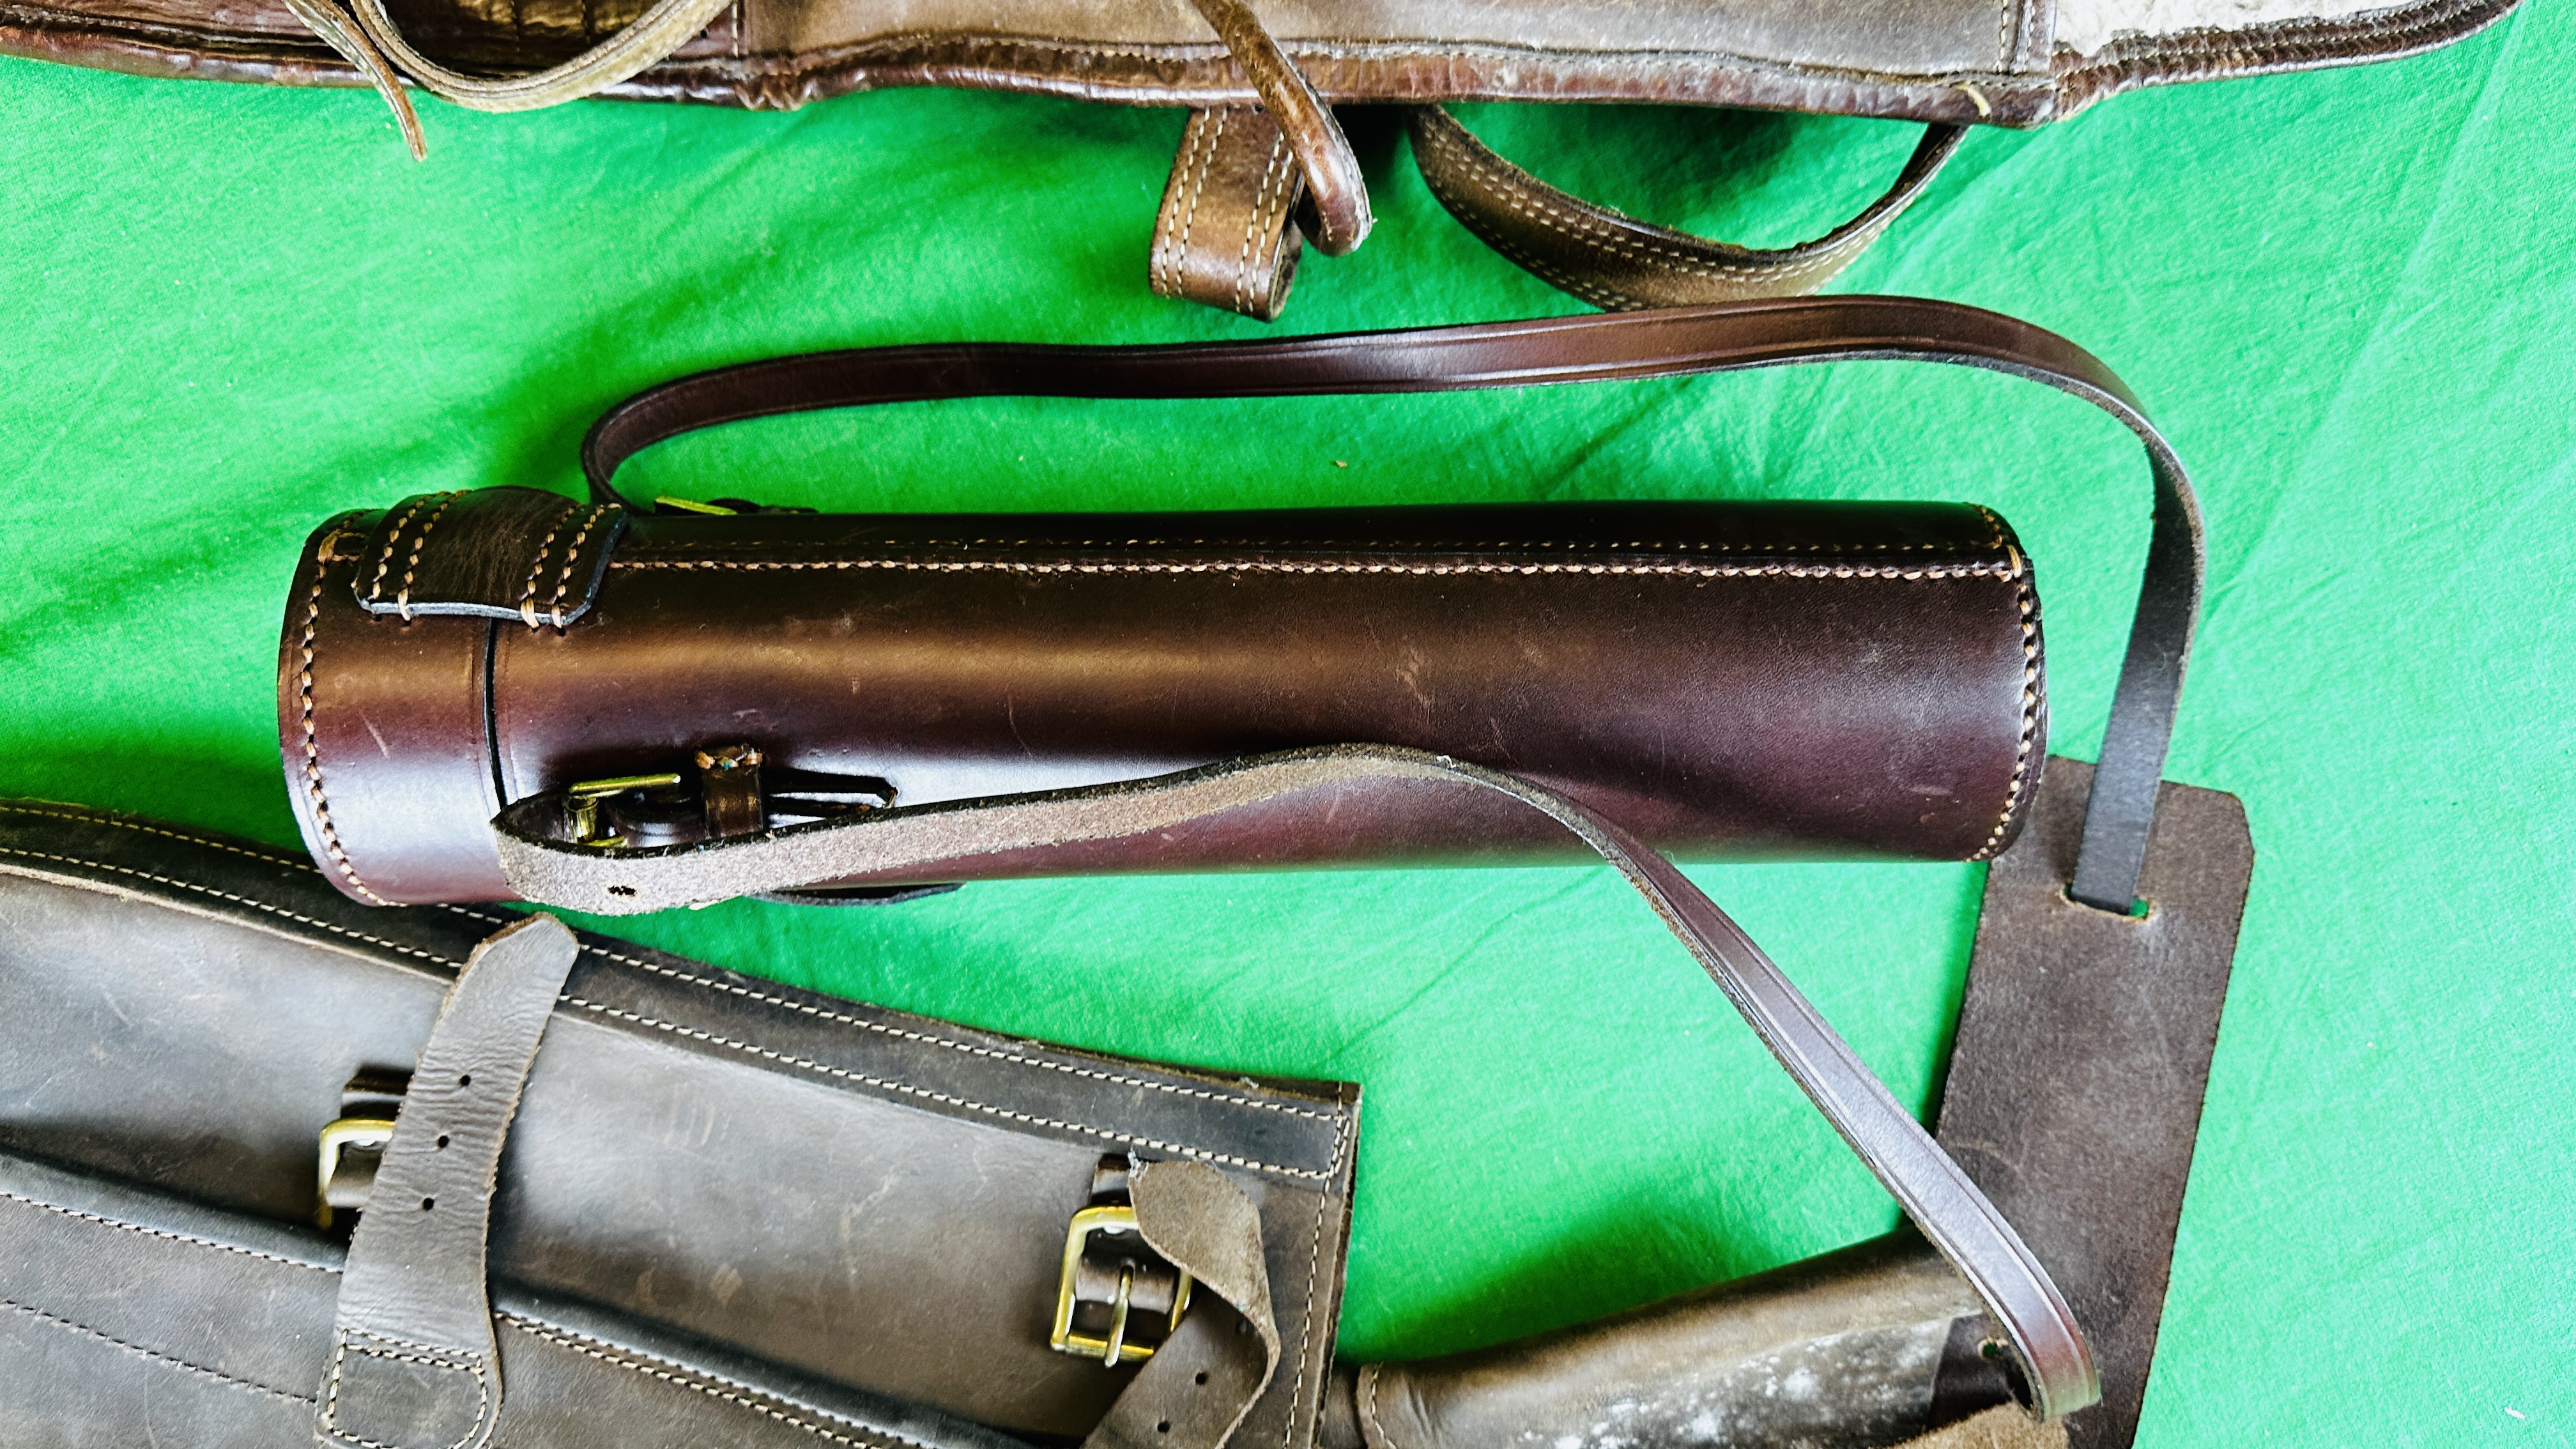 PAIR LEATHER GAITERS, LEATHER SHOTGUN SLIP AND TAN LEATHER FLASK HOLDER. - Image 5 of 10